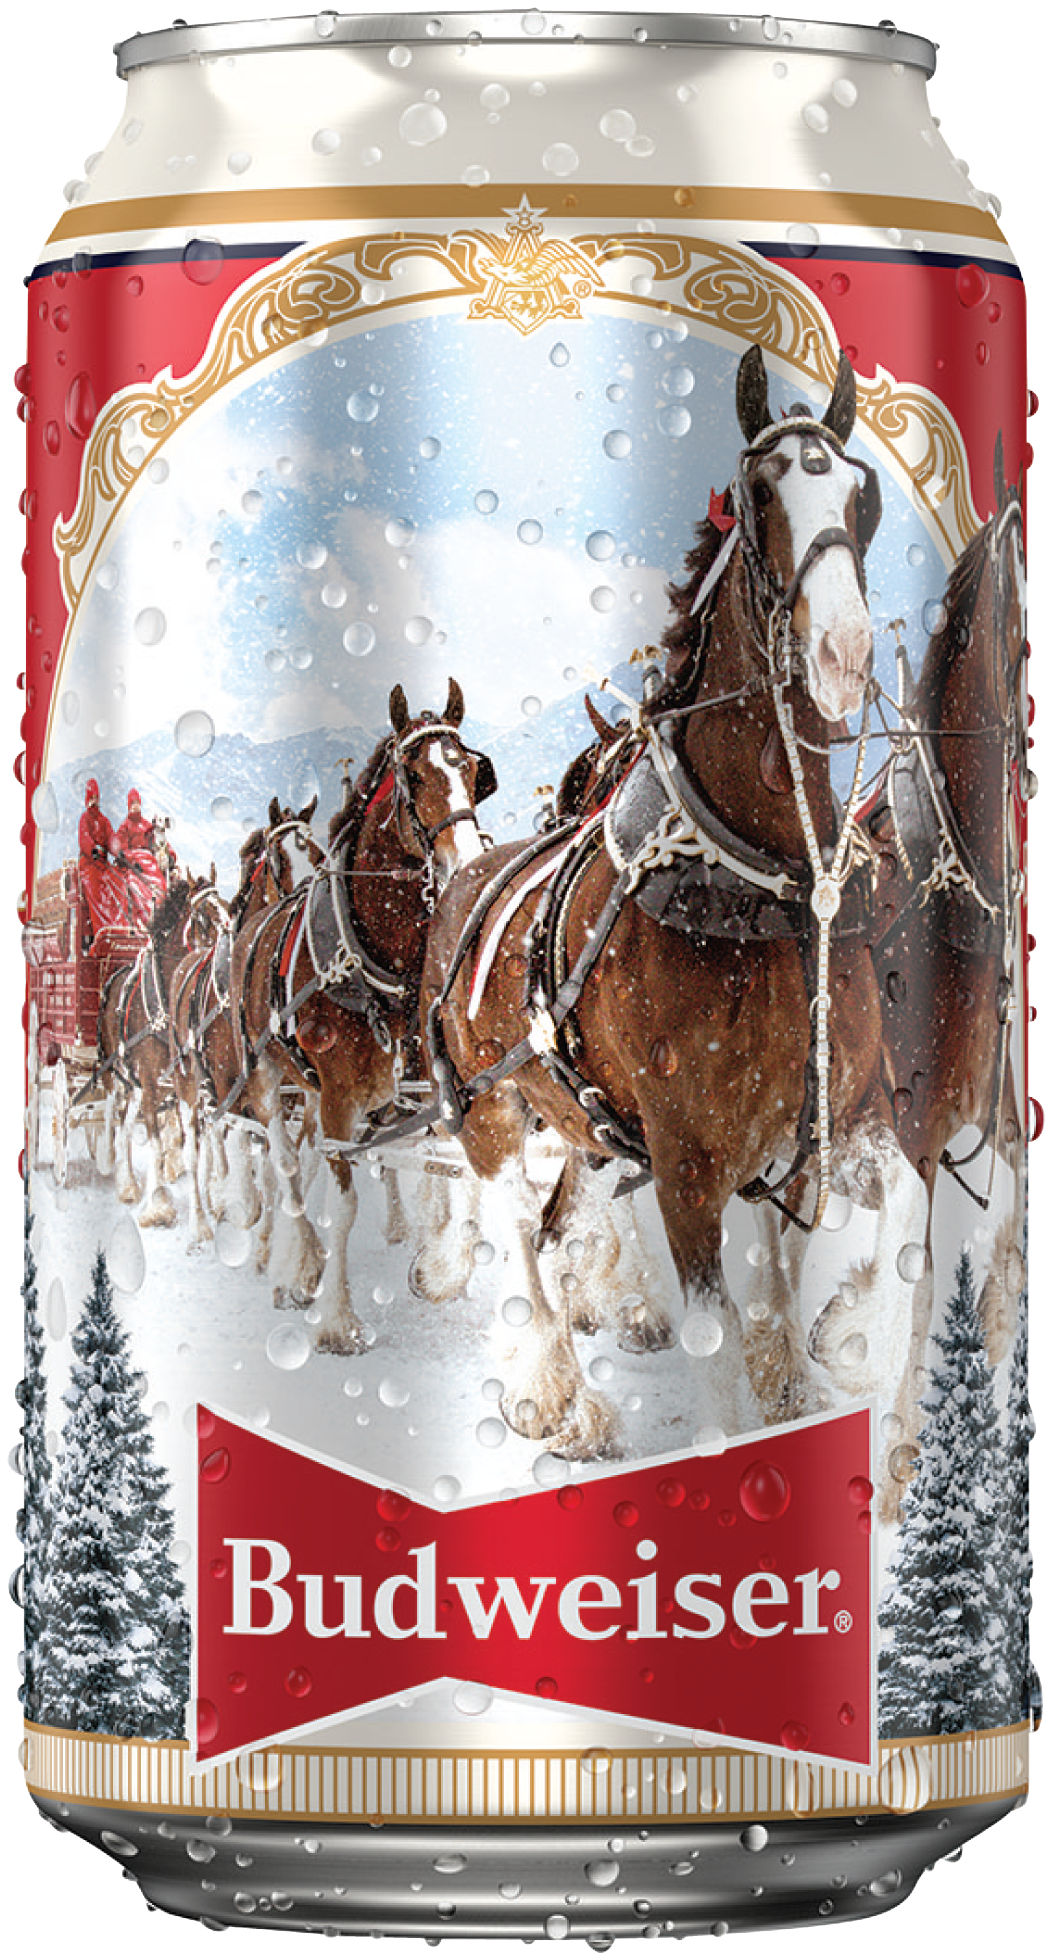 Budweiser Limited Edition Holiday Stein #1 12oz beer can 